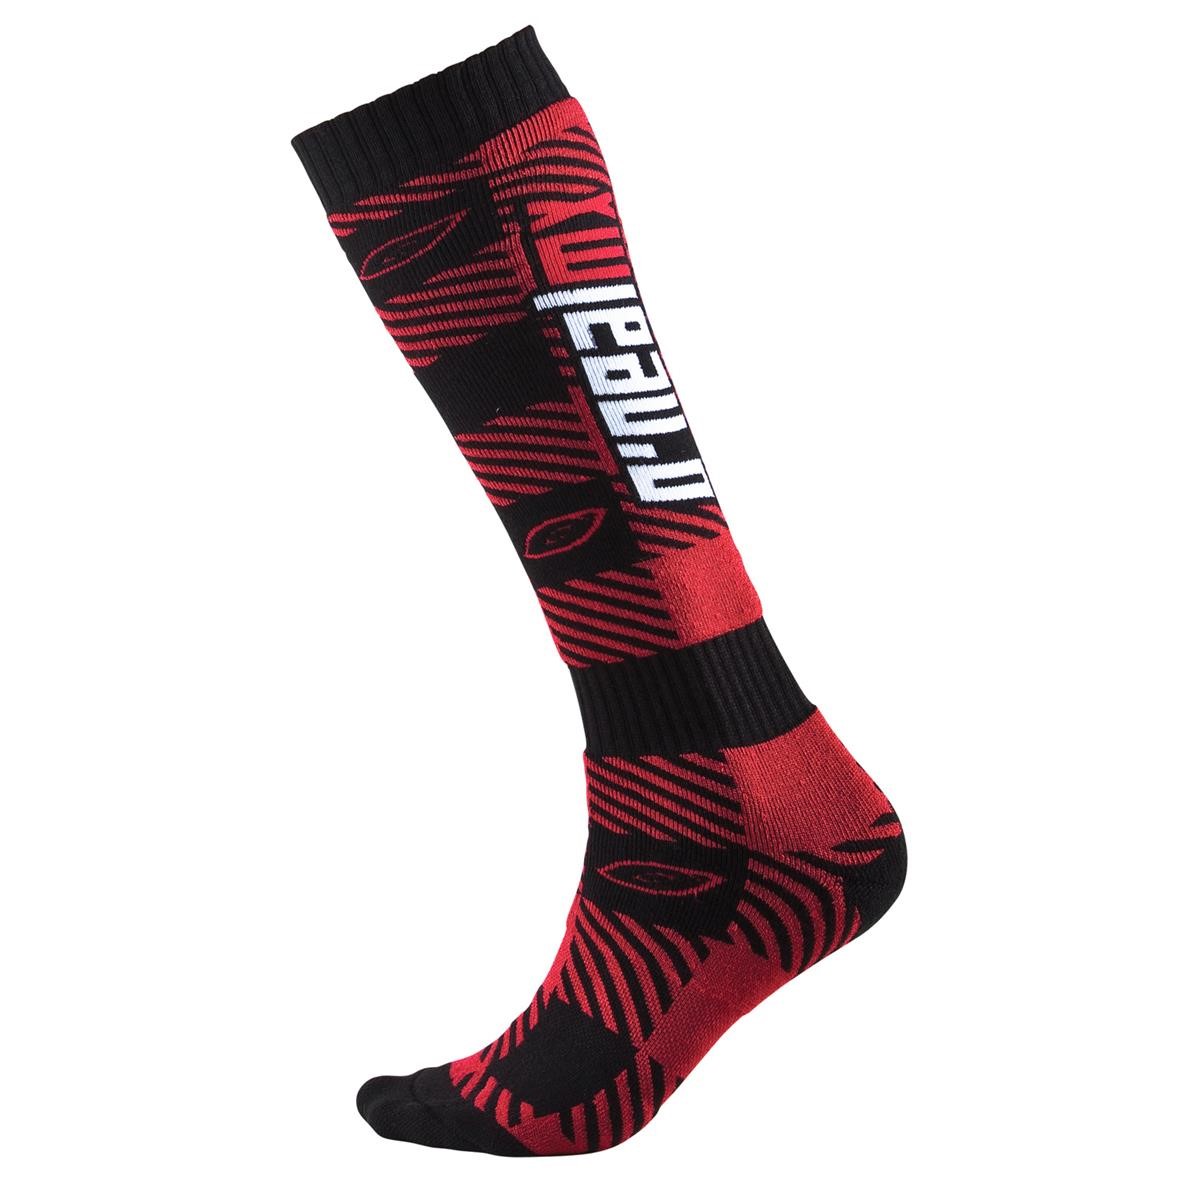 O'Neal Chaussettes Pro MX Plaid Black/Red